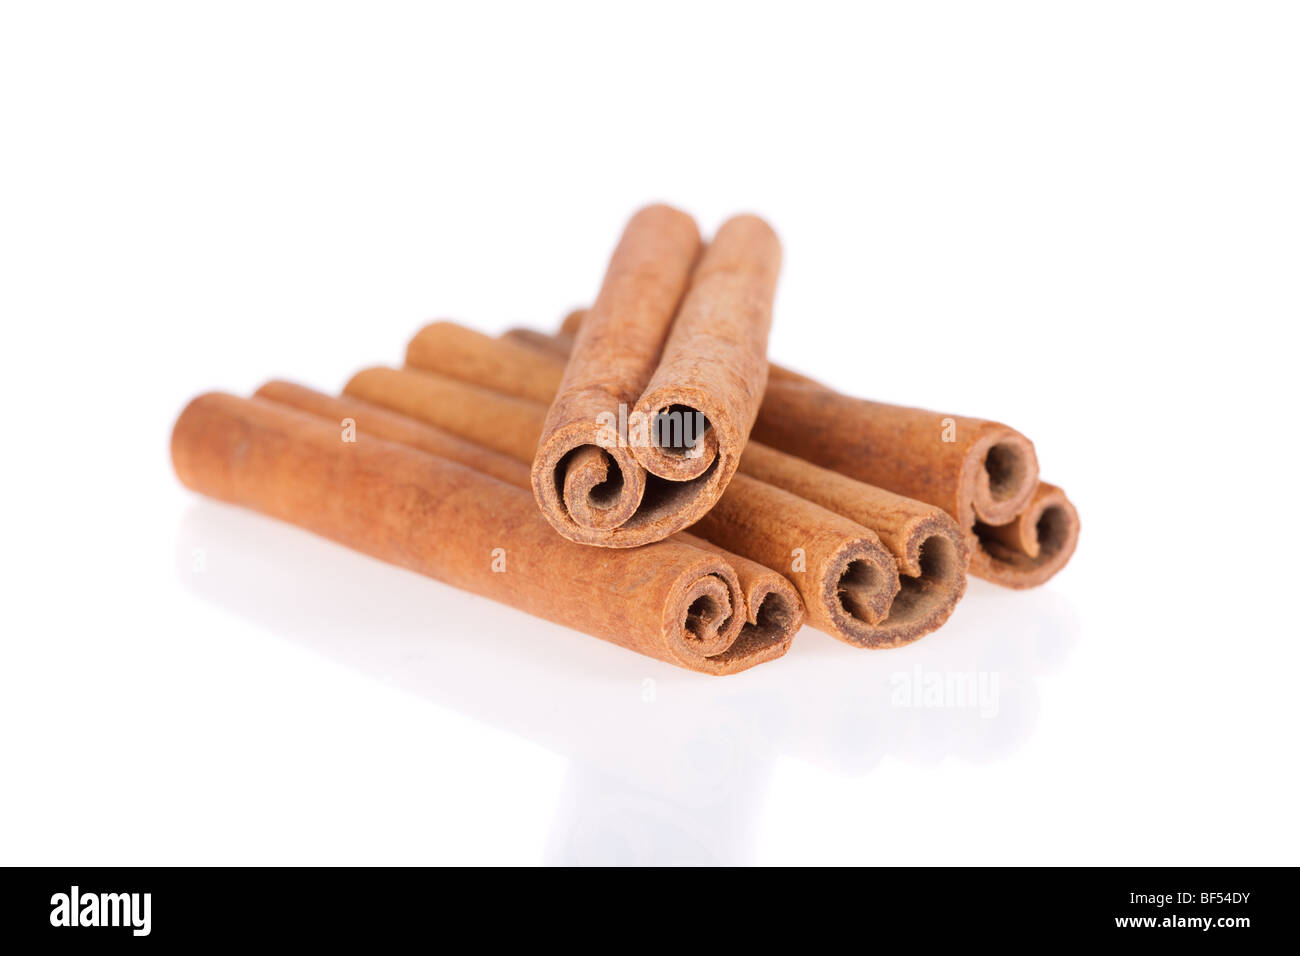 Cinnamon sticks isolated on a white background Stock Photo